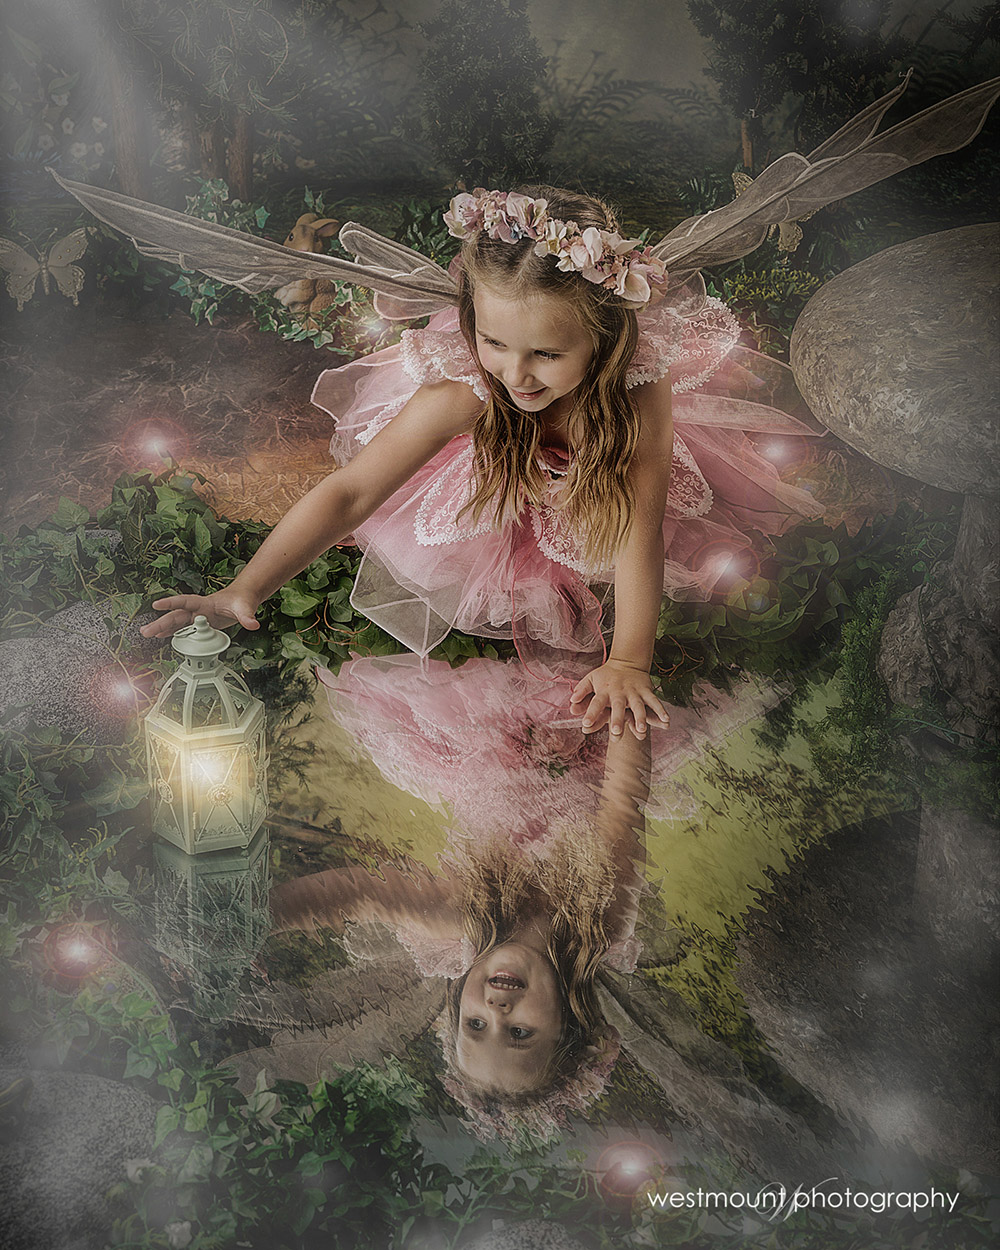 Cute little fairies are filled with love and wonder…